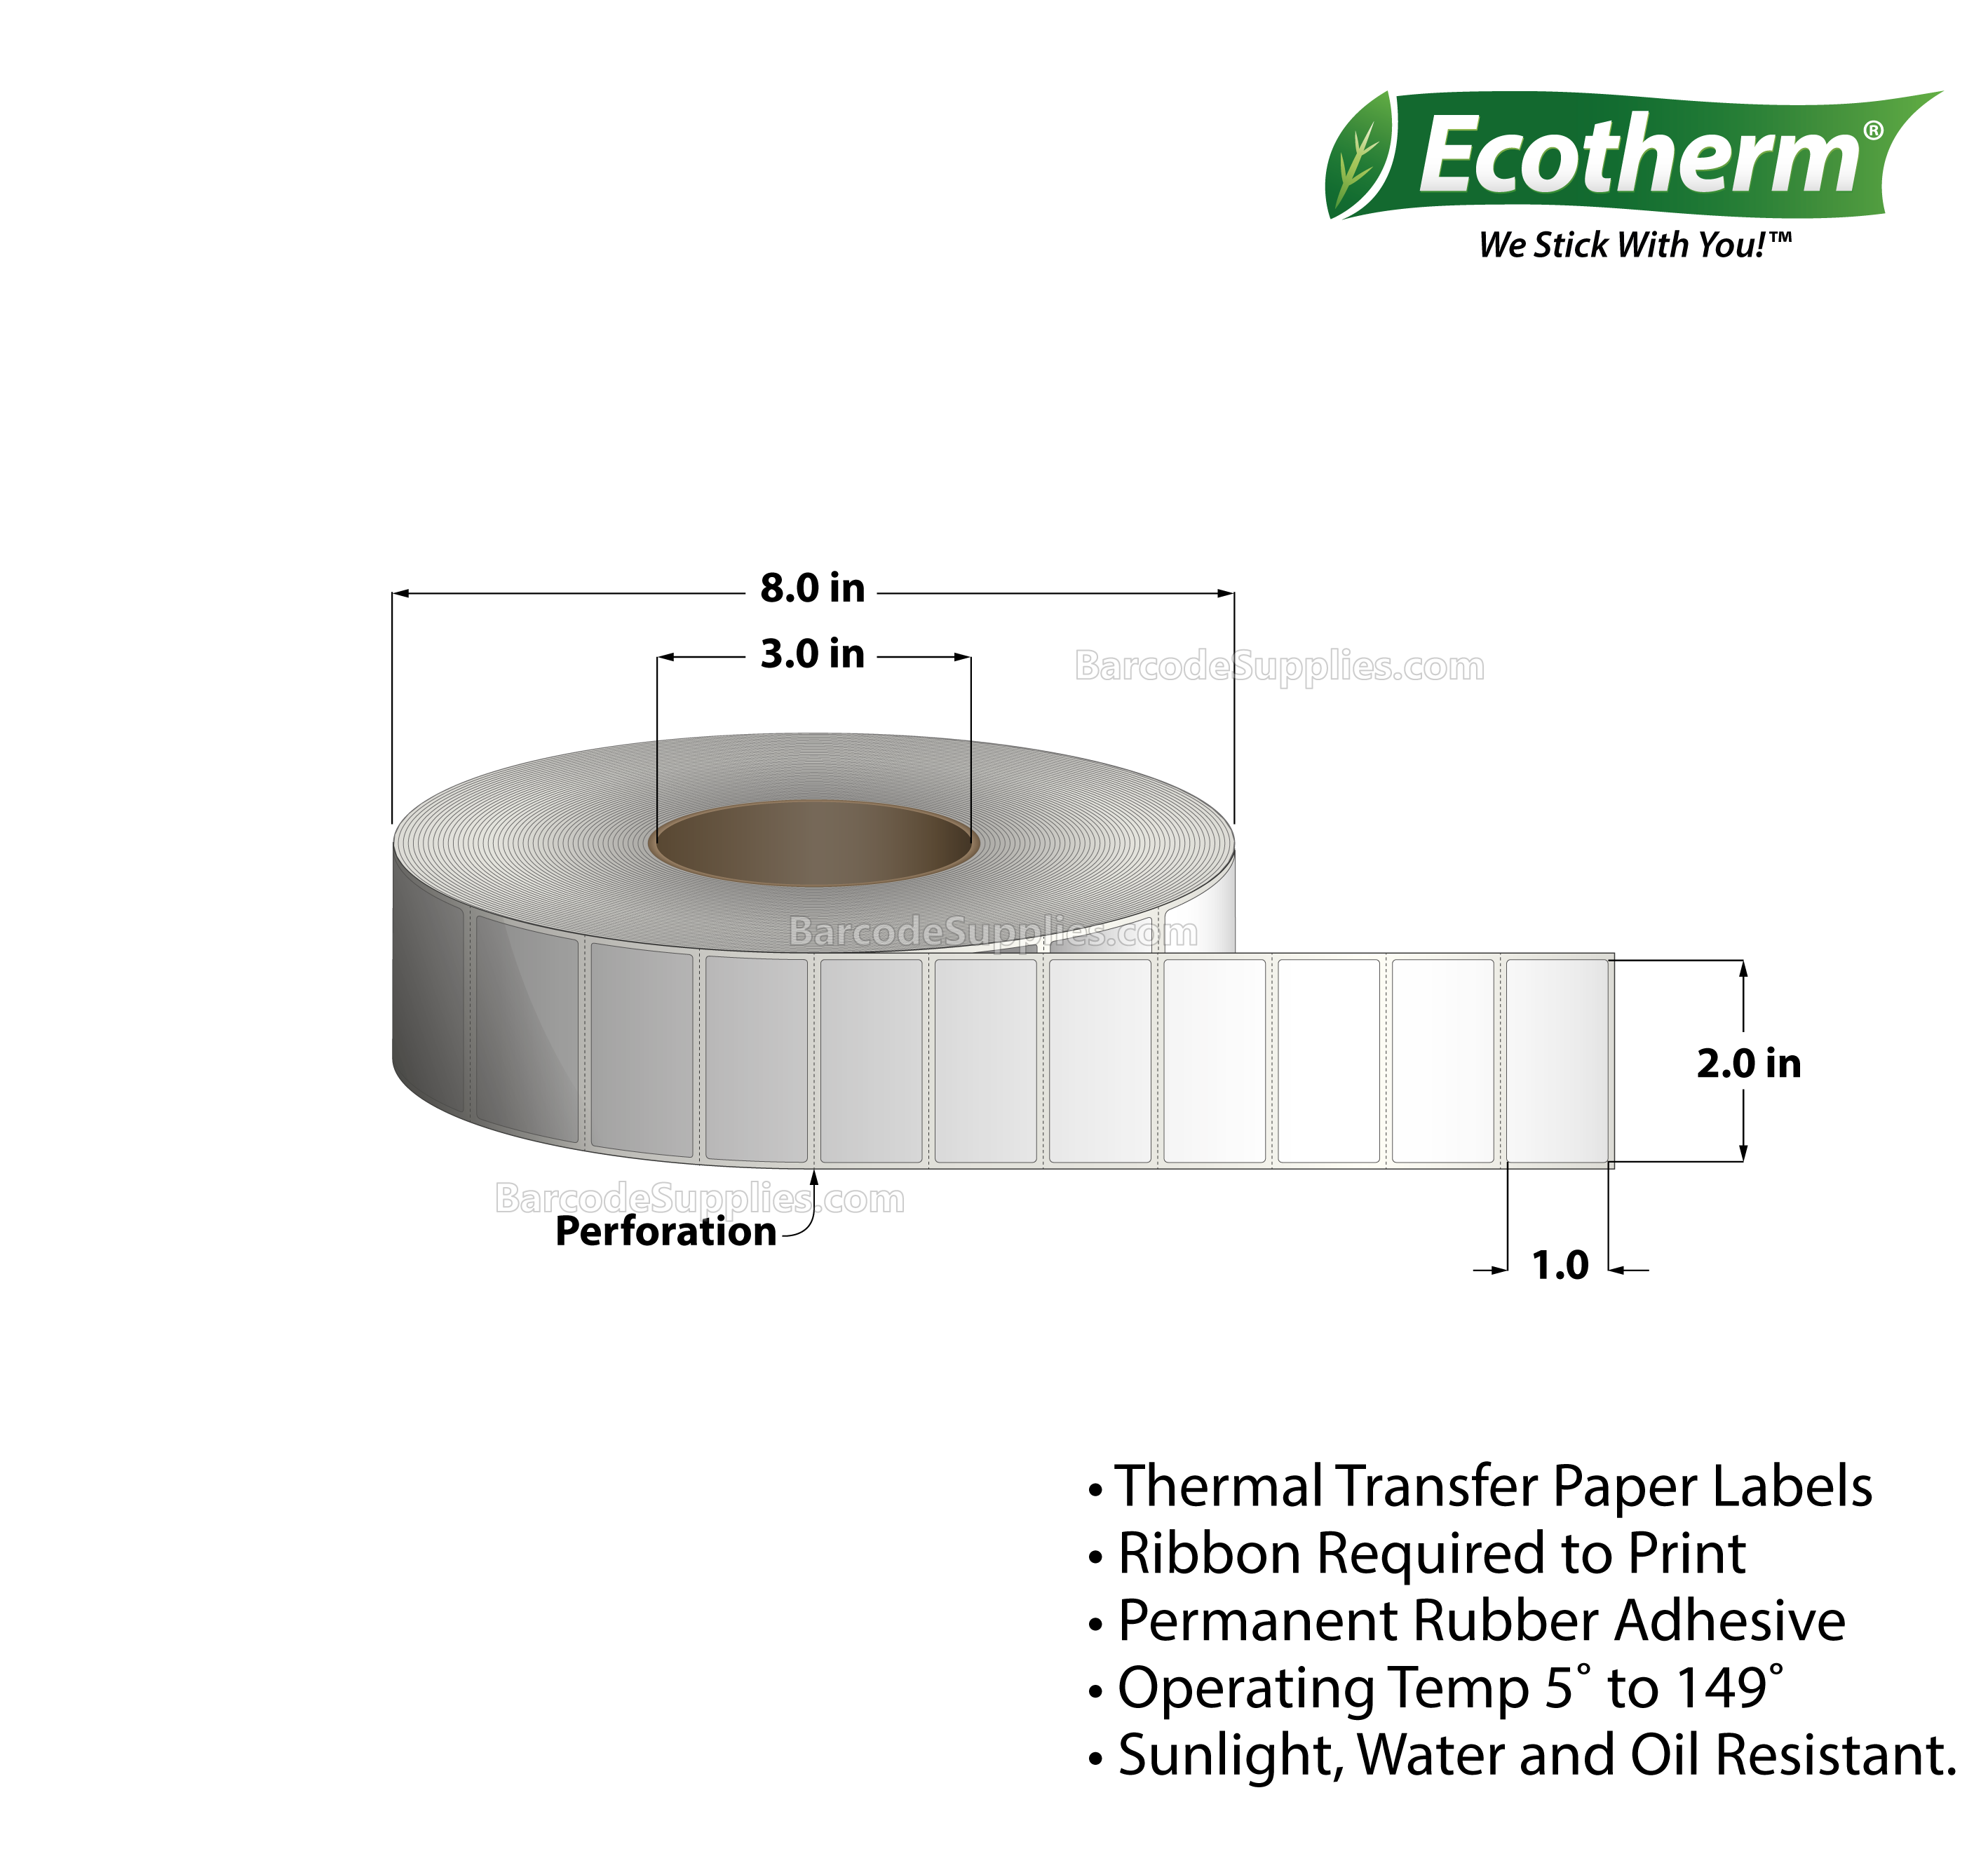 2 x 1 Thermal Transfer White Labels With Rubber Adhesive - Perforated - 5500 Labels Per Roll - Carton Of 4 Rolls - 22000 Labels Total - MPN: ECOTHERM28161-4